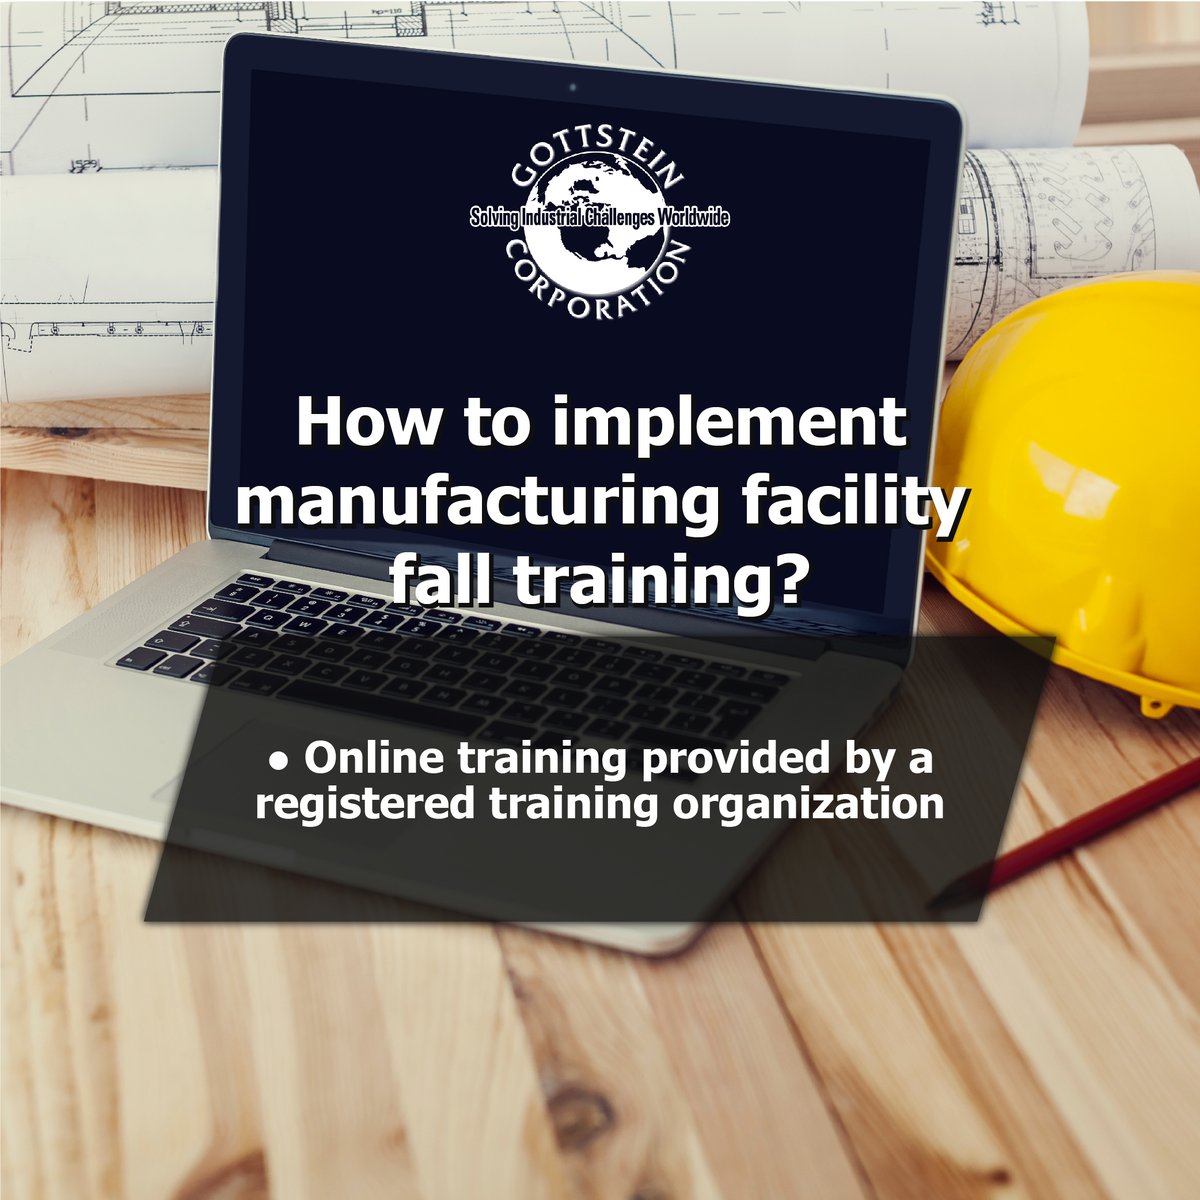 How to implement manufacturing facility fall training?
We can help you ⭐
Contact us: +1 570-454-7162
e-mail: info@gottsteincorporation.com
gottsteincorporation.com/how-to-protect…
#industrypennsylvania #gottsteincorporation 
#industrialengineering